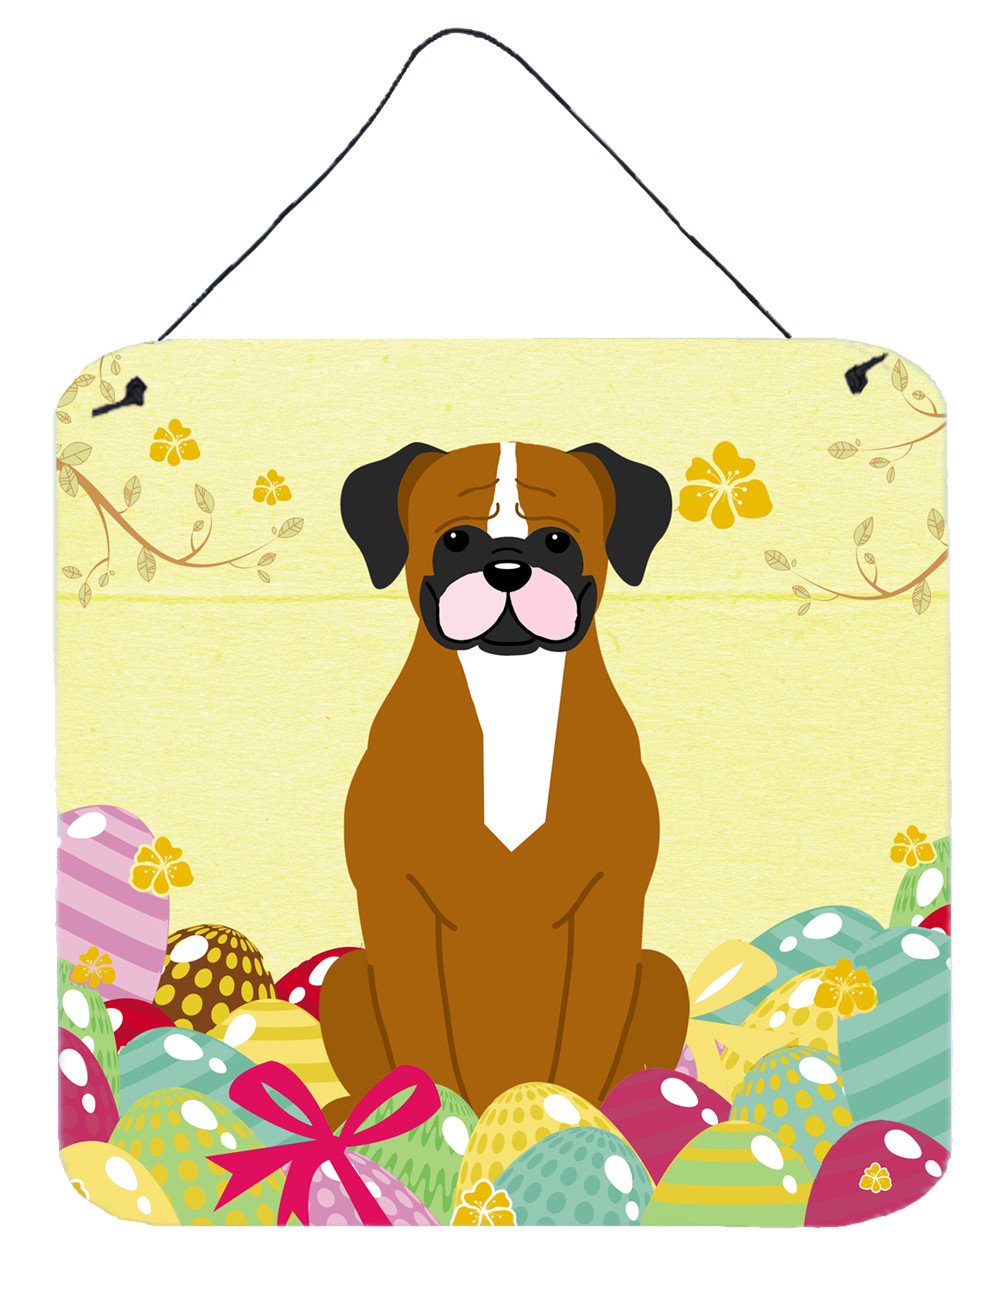 Easter Eggs Flashy Fawn Boxer Wall or Door Hanging Prints BB6116DS66 by Caroline's Treasures